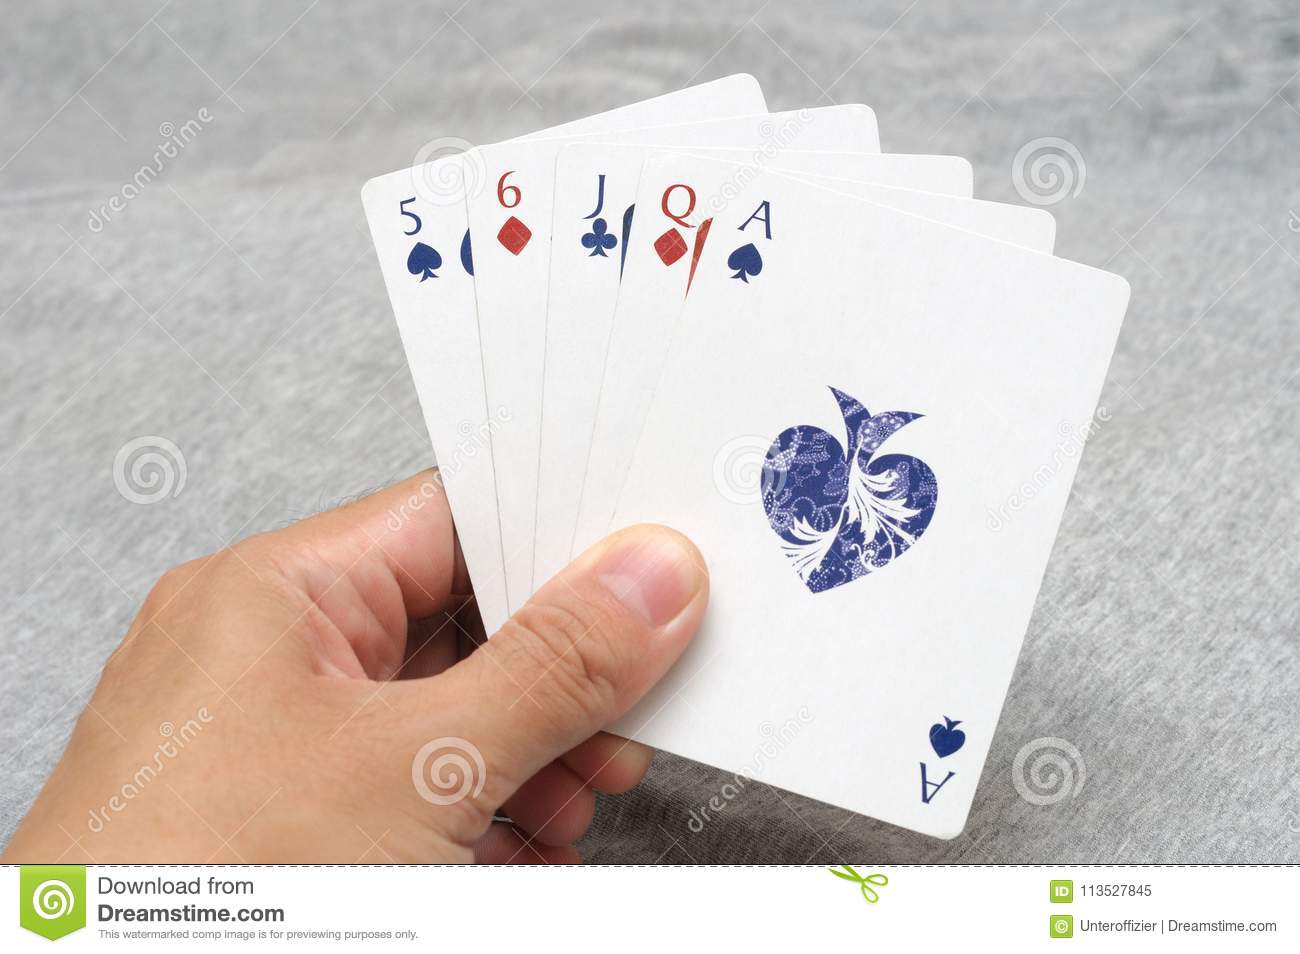 how many possible hands are in a game of five card poker